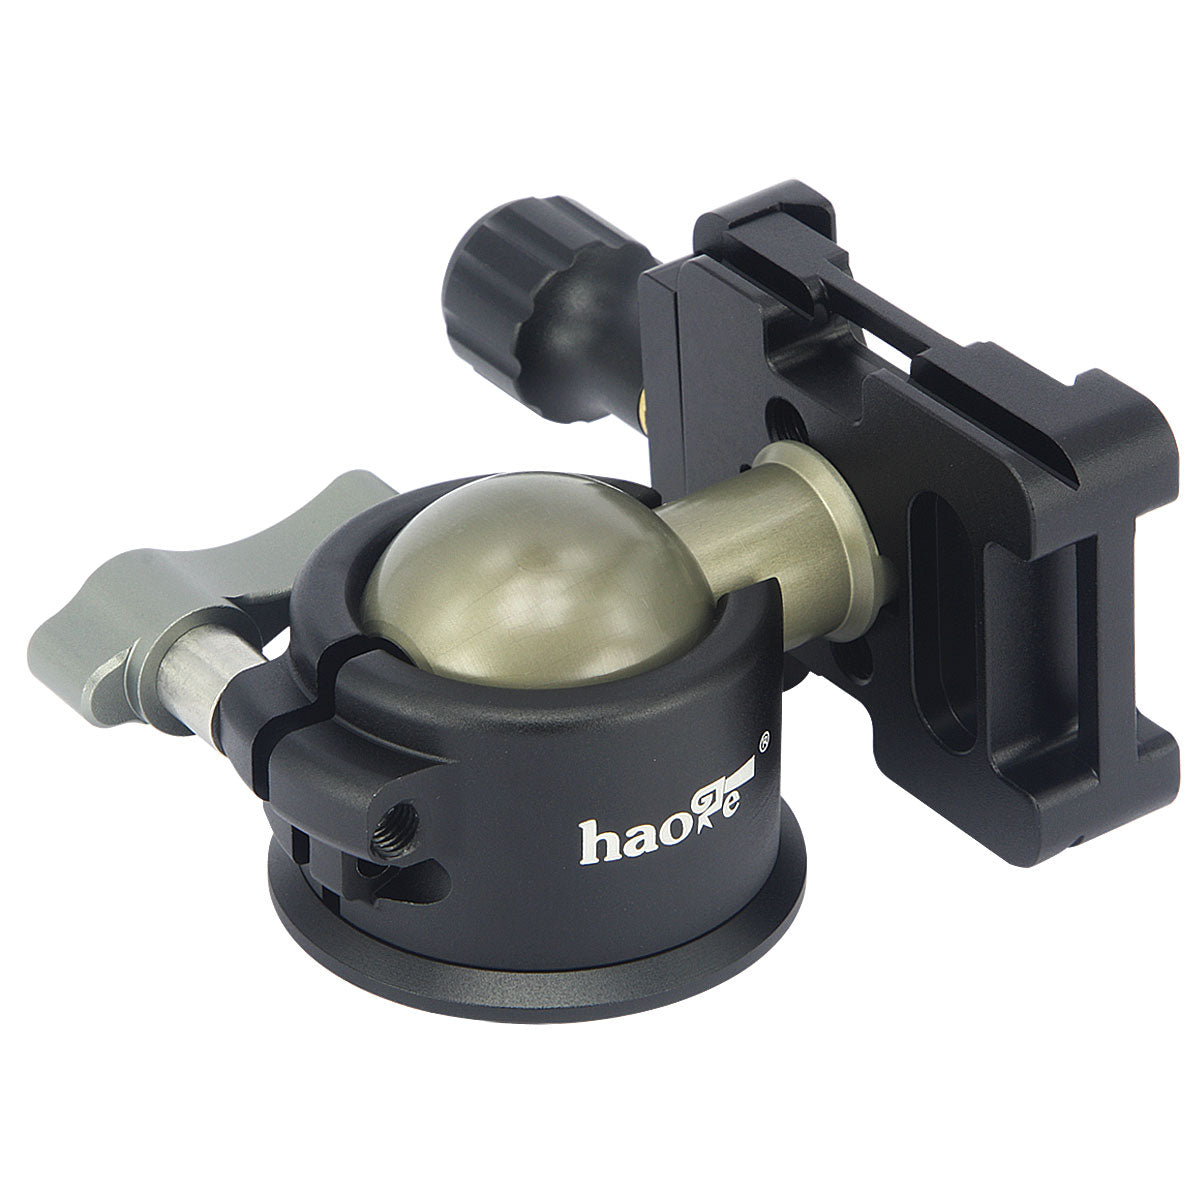 Haoge BH-45 Low Profile Ballhead Tripod Ball Head with Arca-Compatible Screw-Knob Quick Release Clamp and Plate for Tripod Monopod Slider DSLR Camera Camcorder Max Loading 8kg 17.6lb